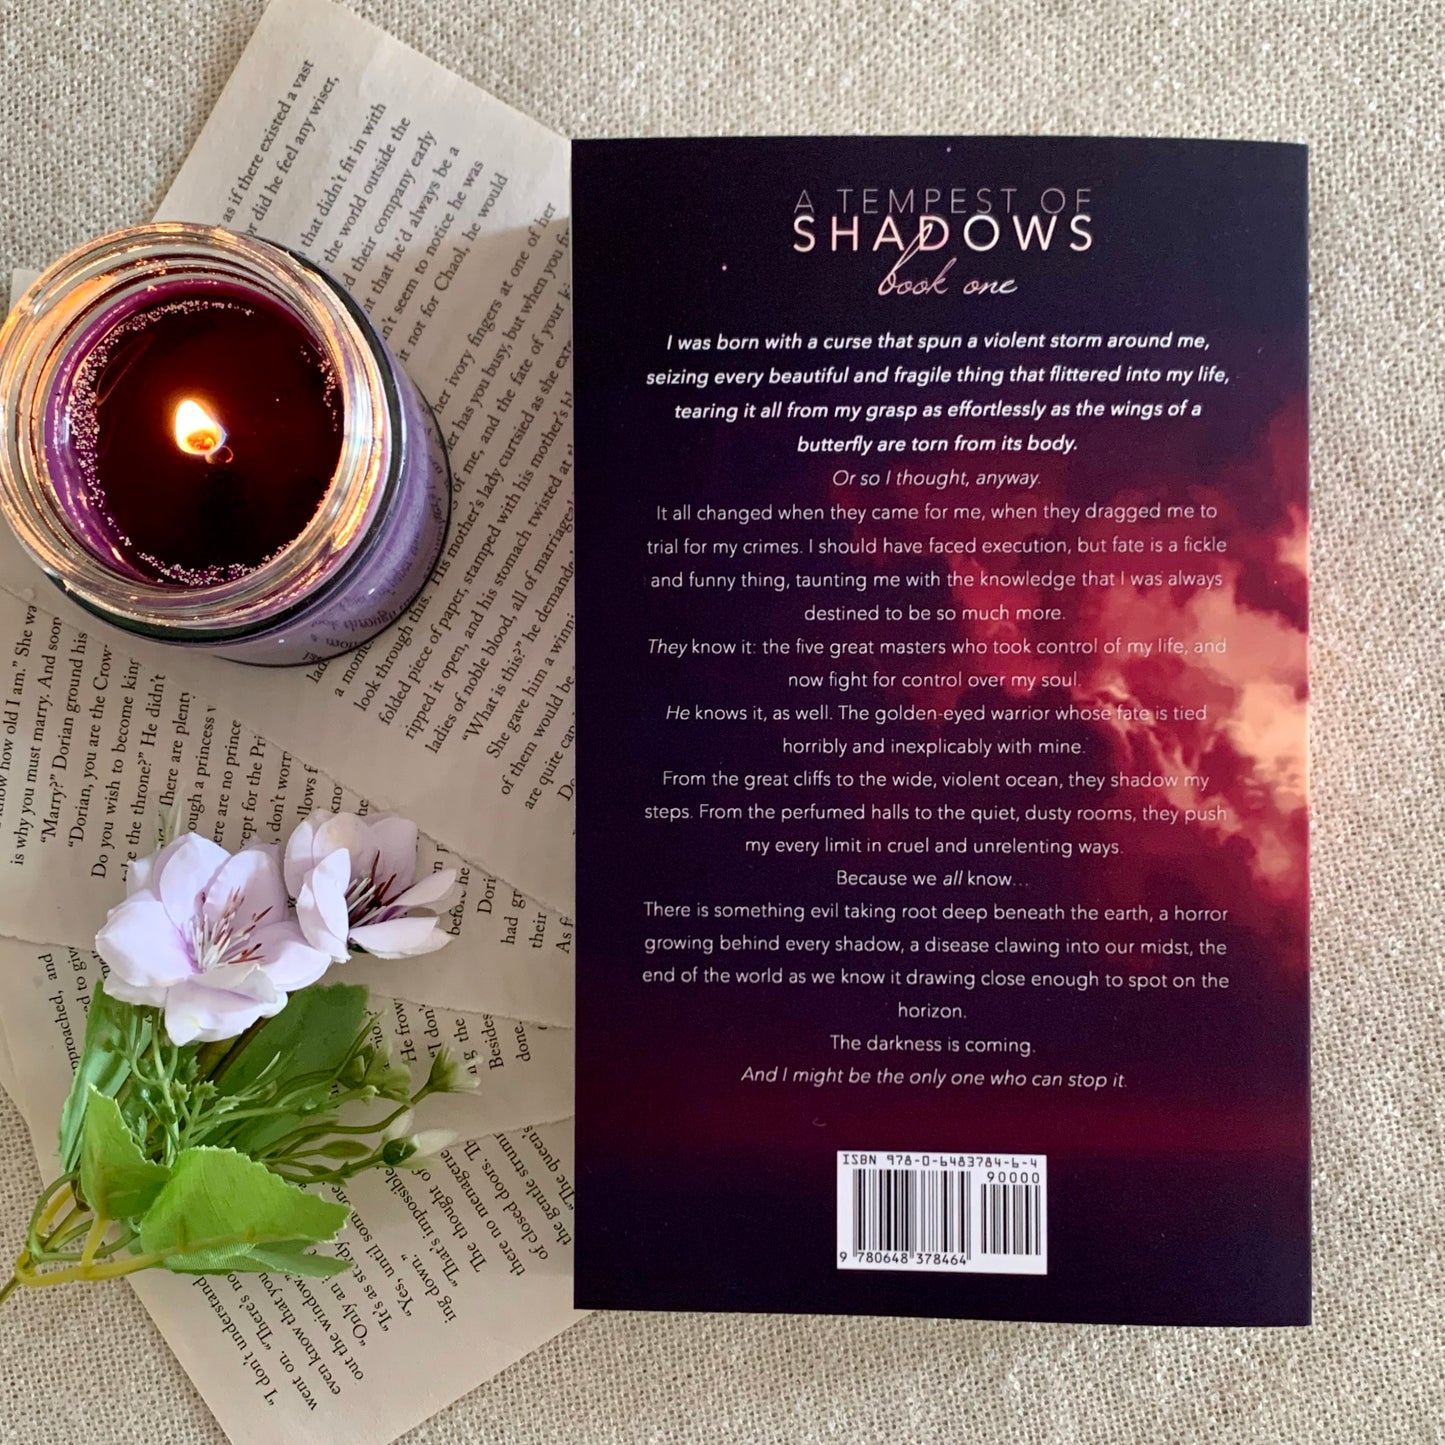 A Tempest of Shadows by Jane Washington